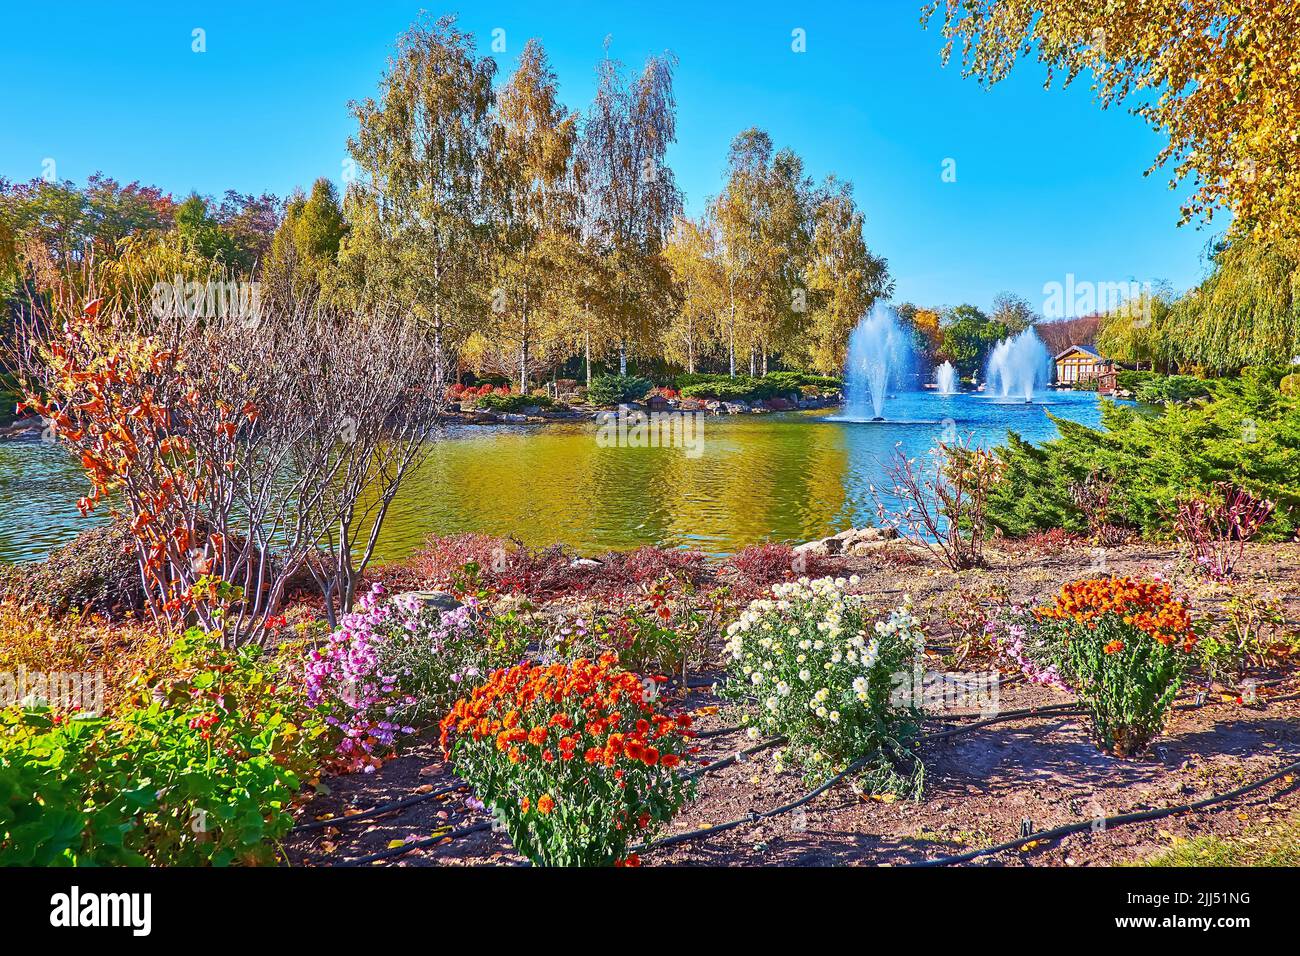 The colored blooming chrysanthemums on the bank of the lake with fountains, surrounded with red and yellow autumn trees, Mezhyhirya, Ukraine Stock Photo